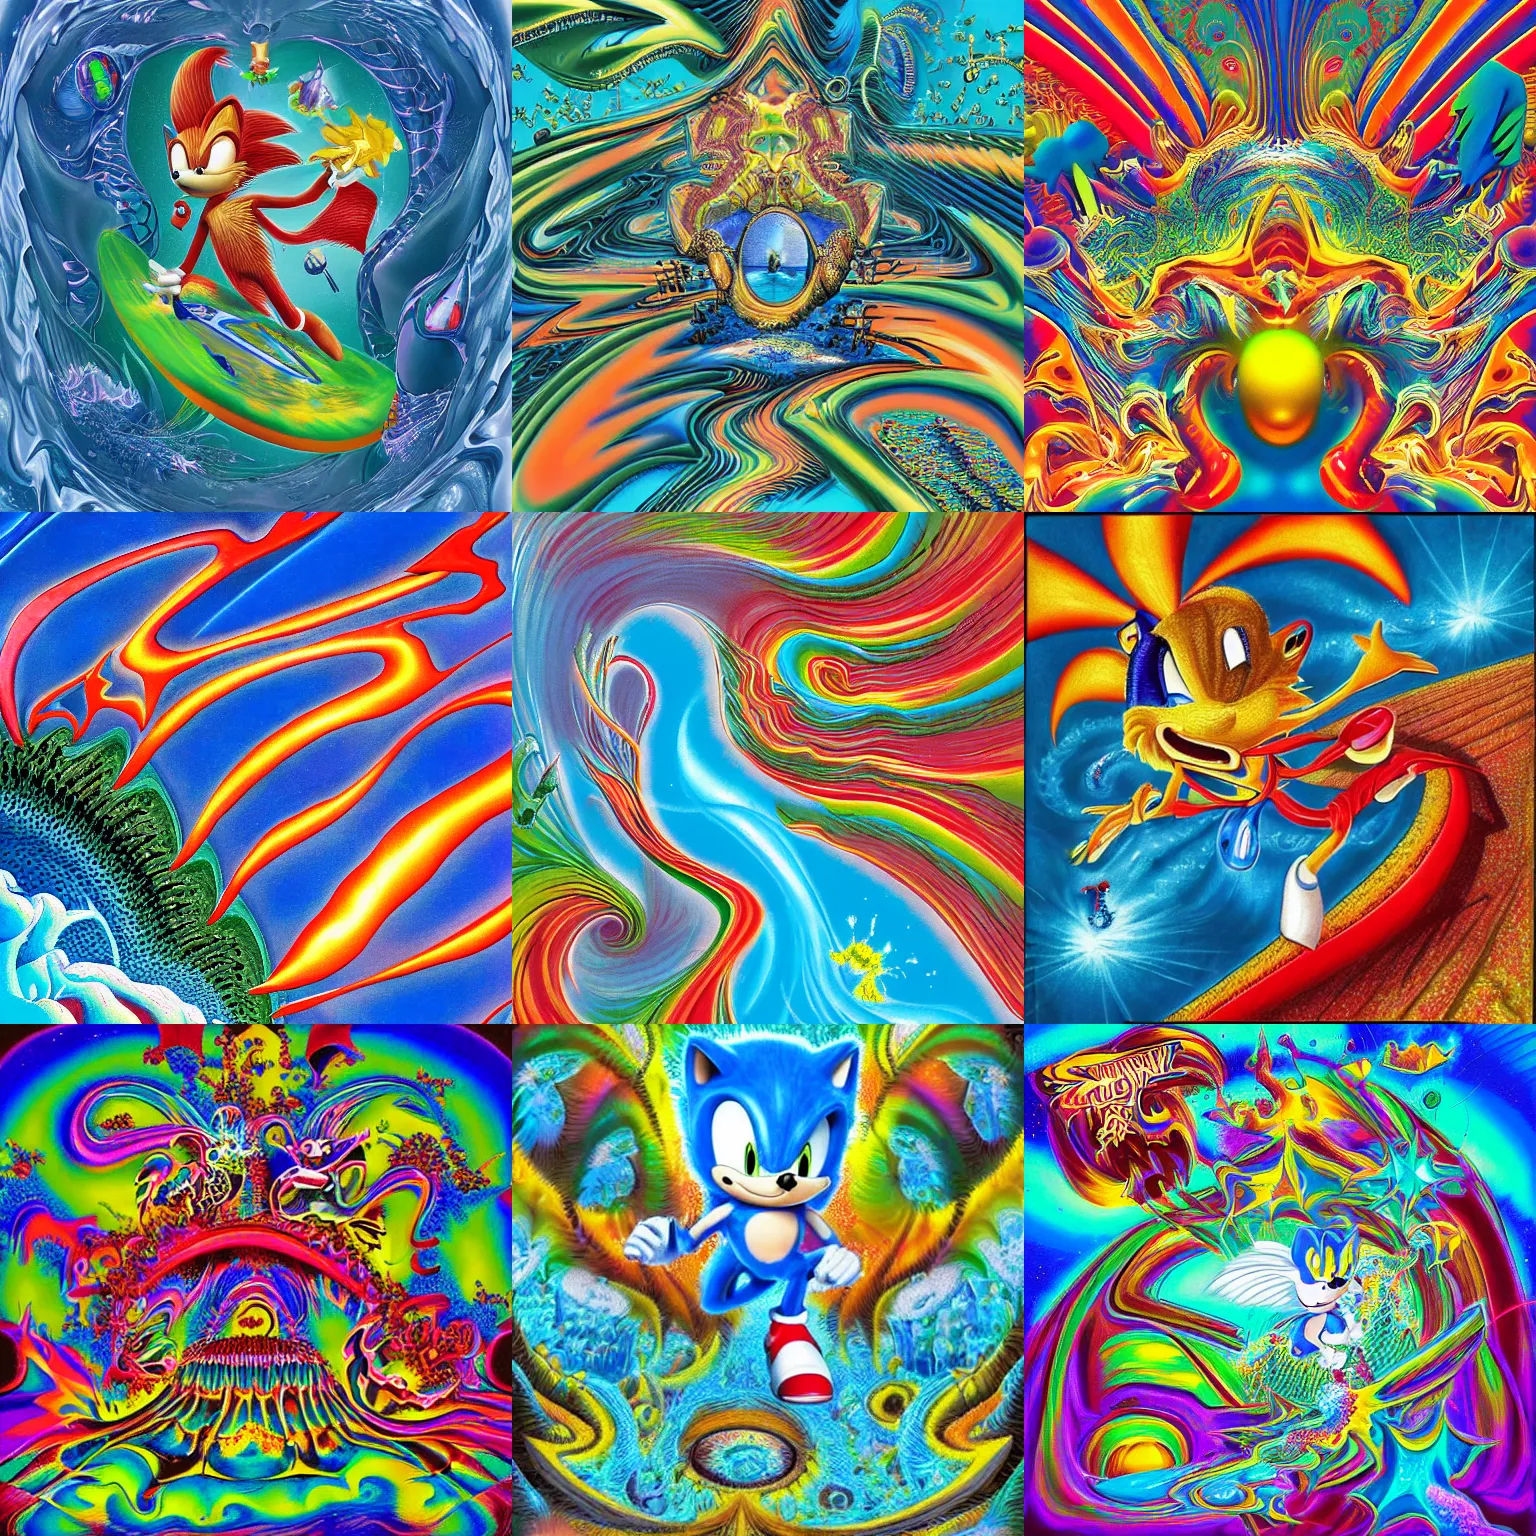 Prompt: surreal, sharp, detailed professional, high quality airbrush art MGMT album cover of a liquid dissolving LSD DMT sonic the hedgehog surfing through cyberspace, mandelbrot pattern, 1990s 1992 Sega Genesis video game album cover